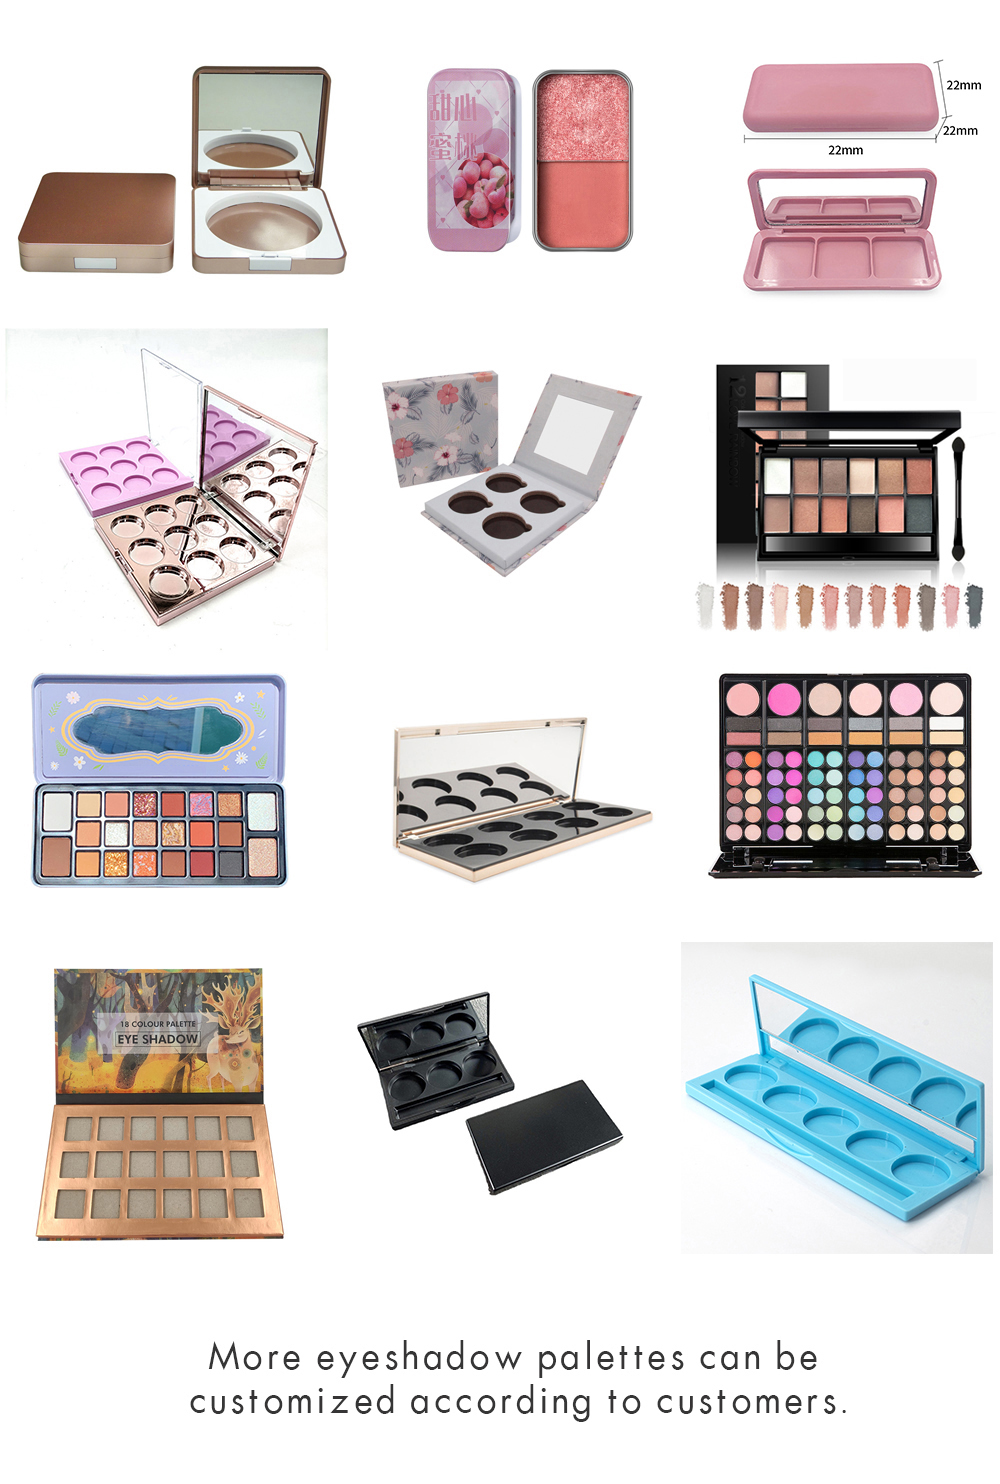 5. Customized 30-color eyeshadow palette